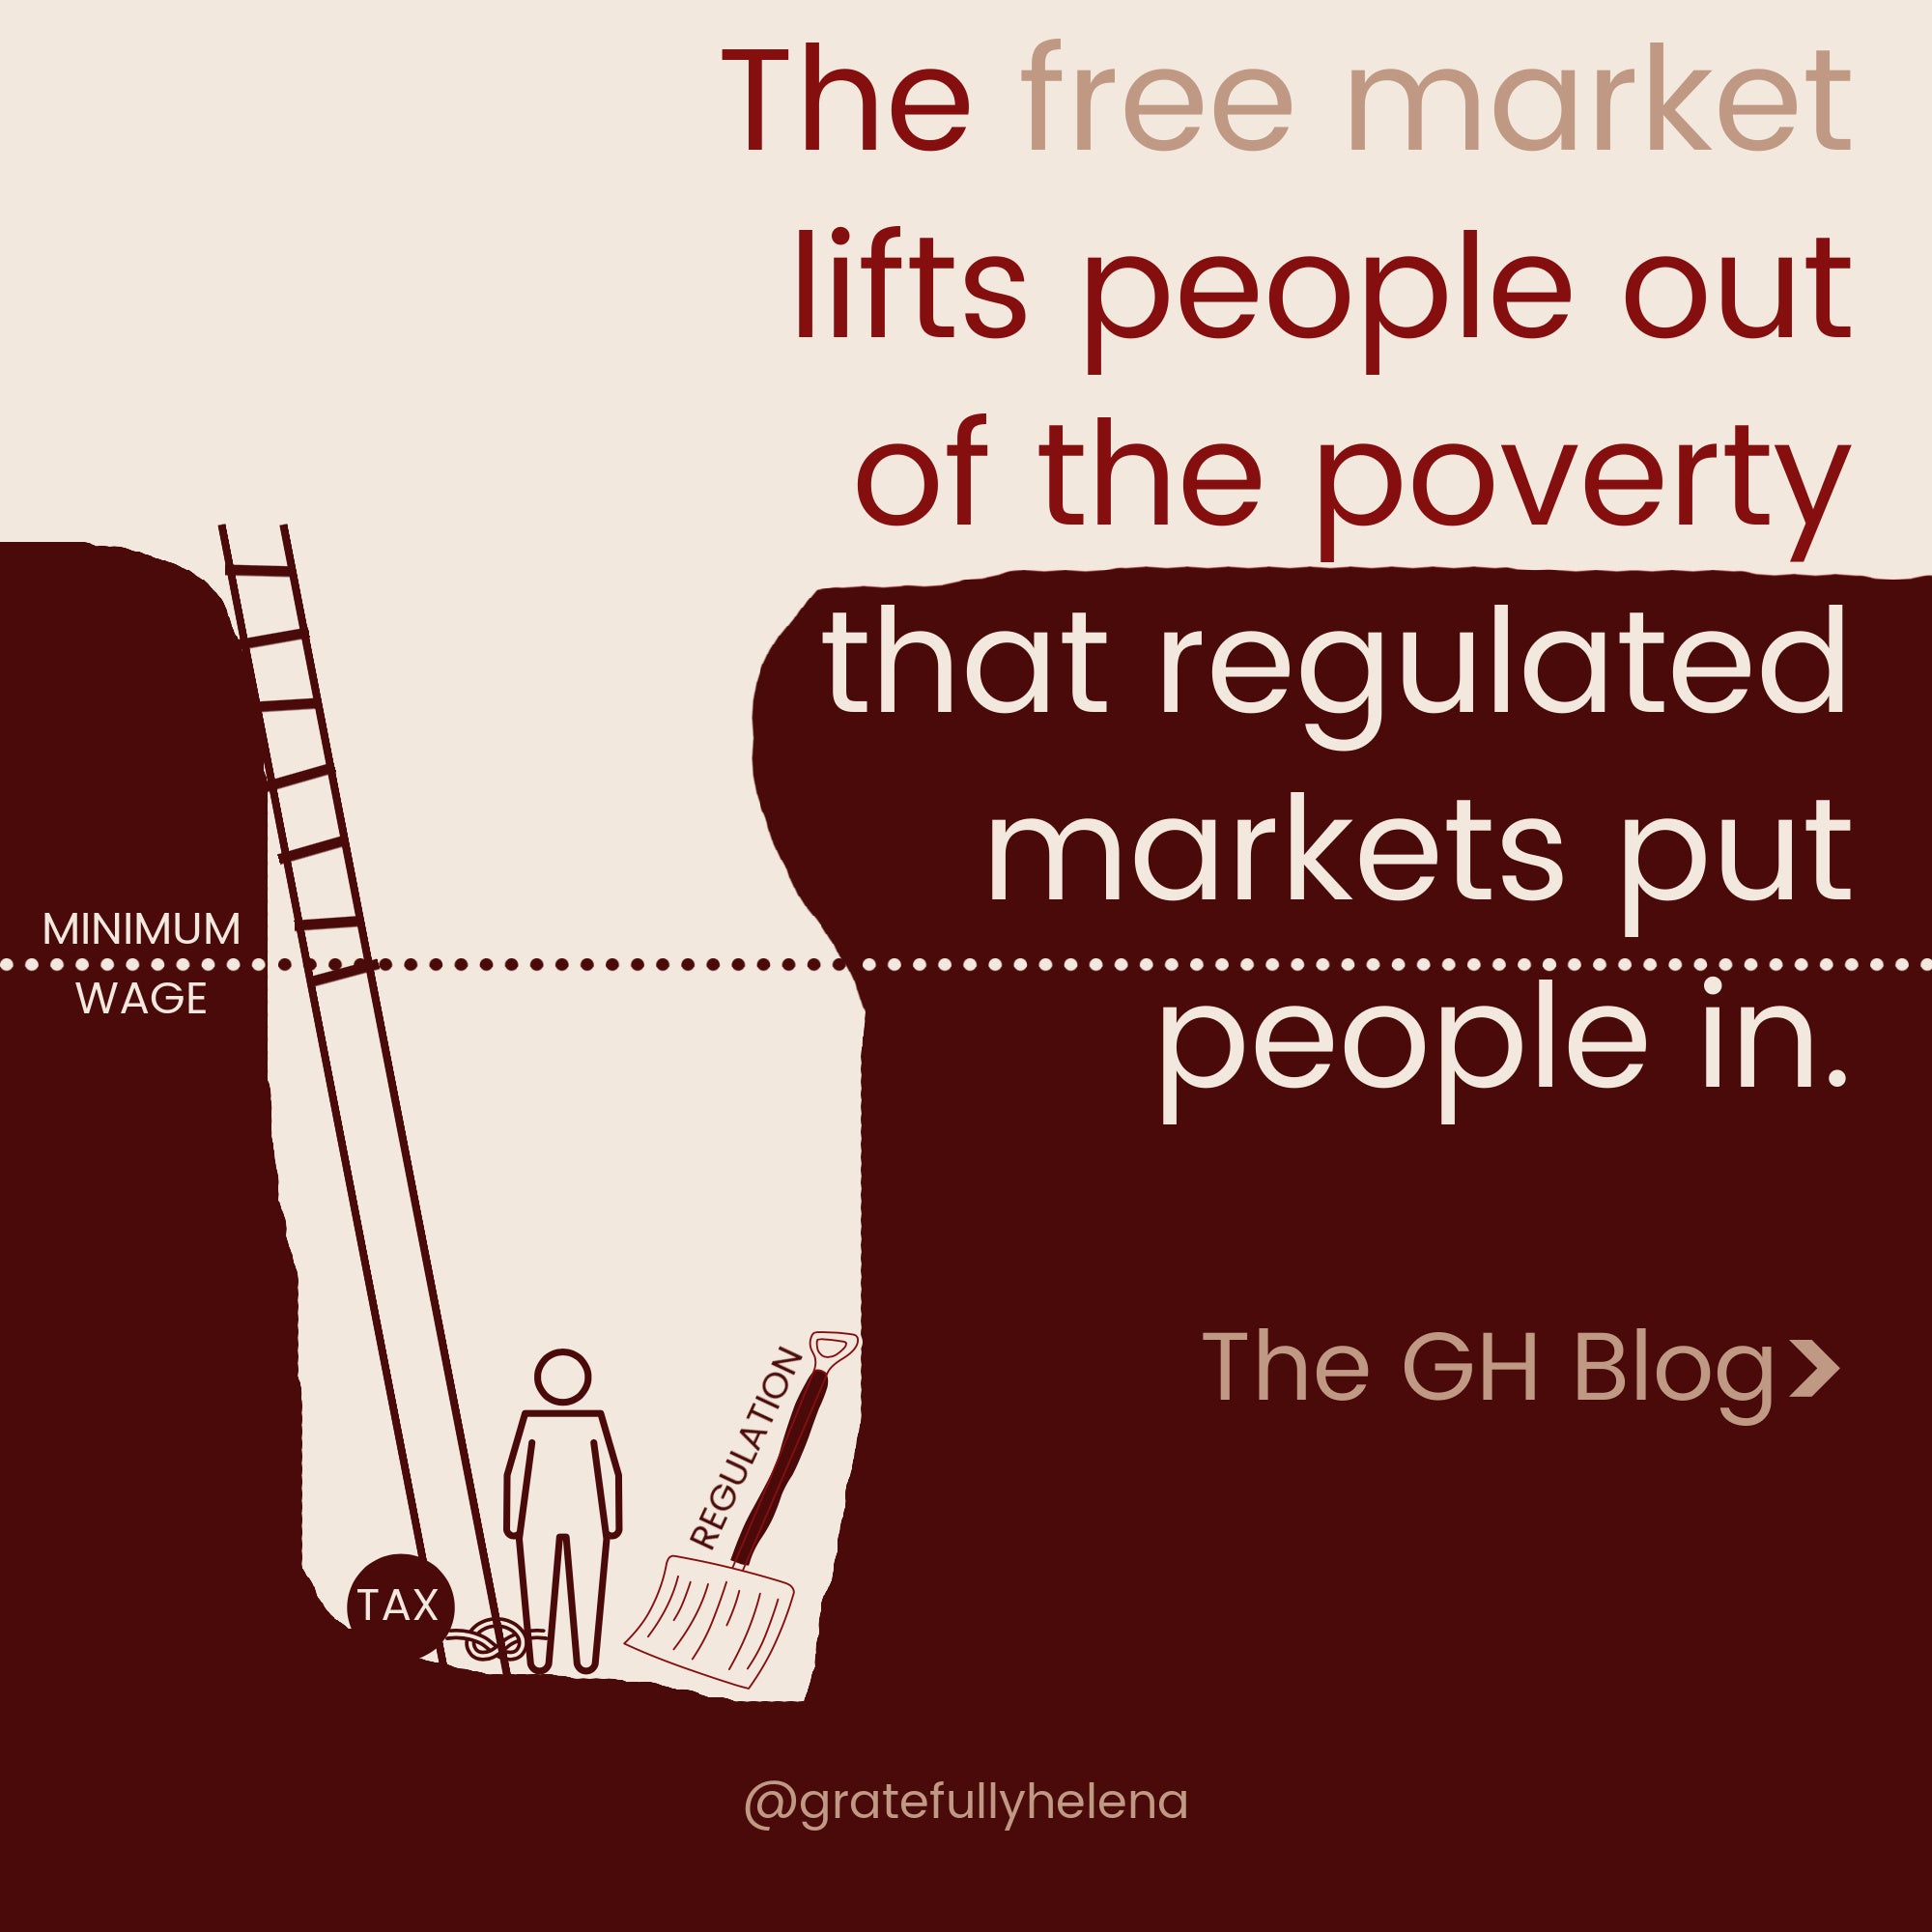 Lifting People Out of Poverty Through the Free Market